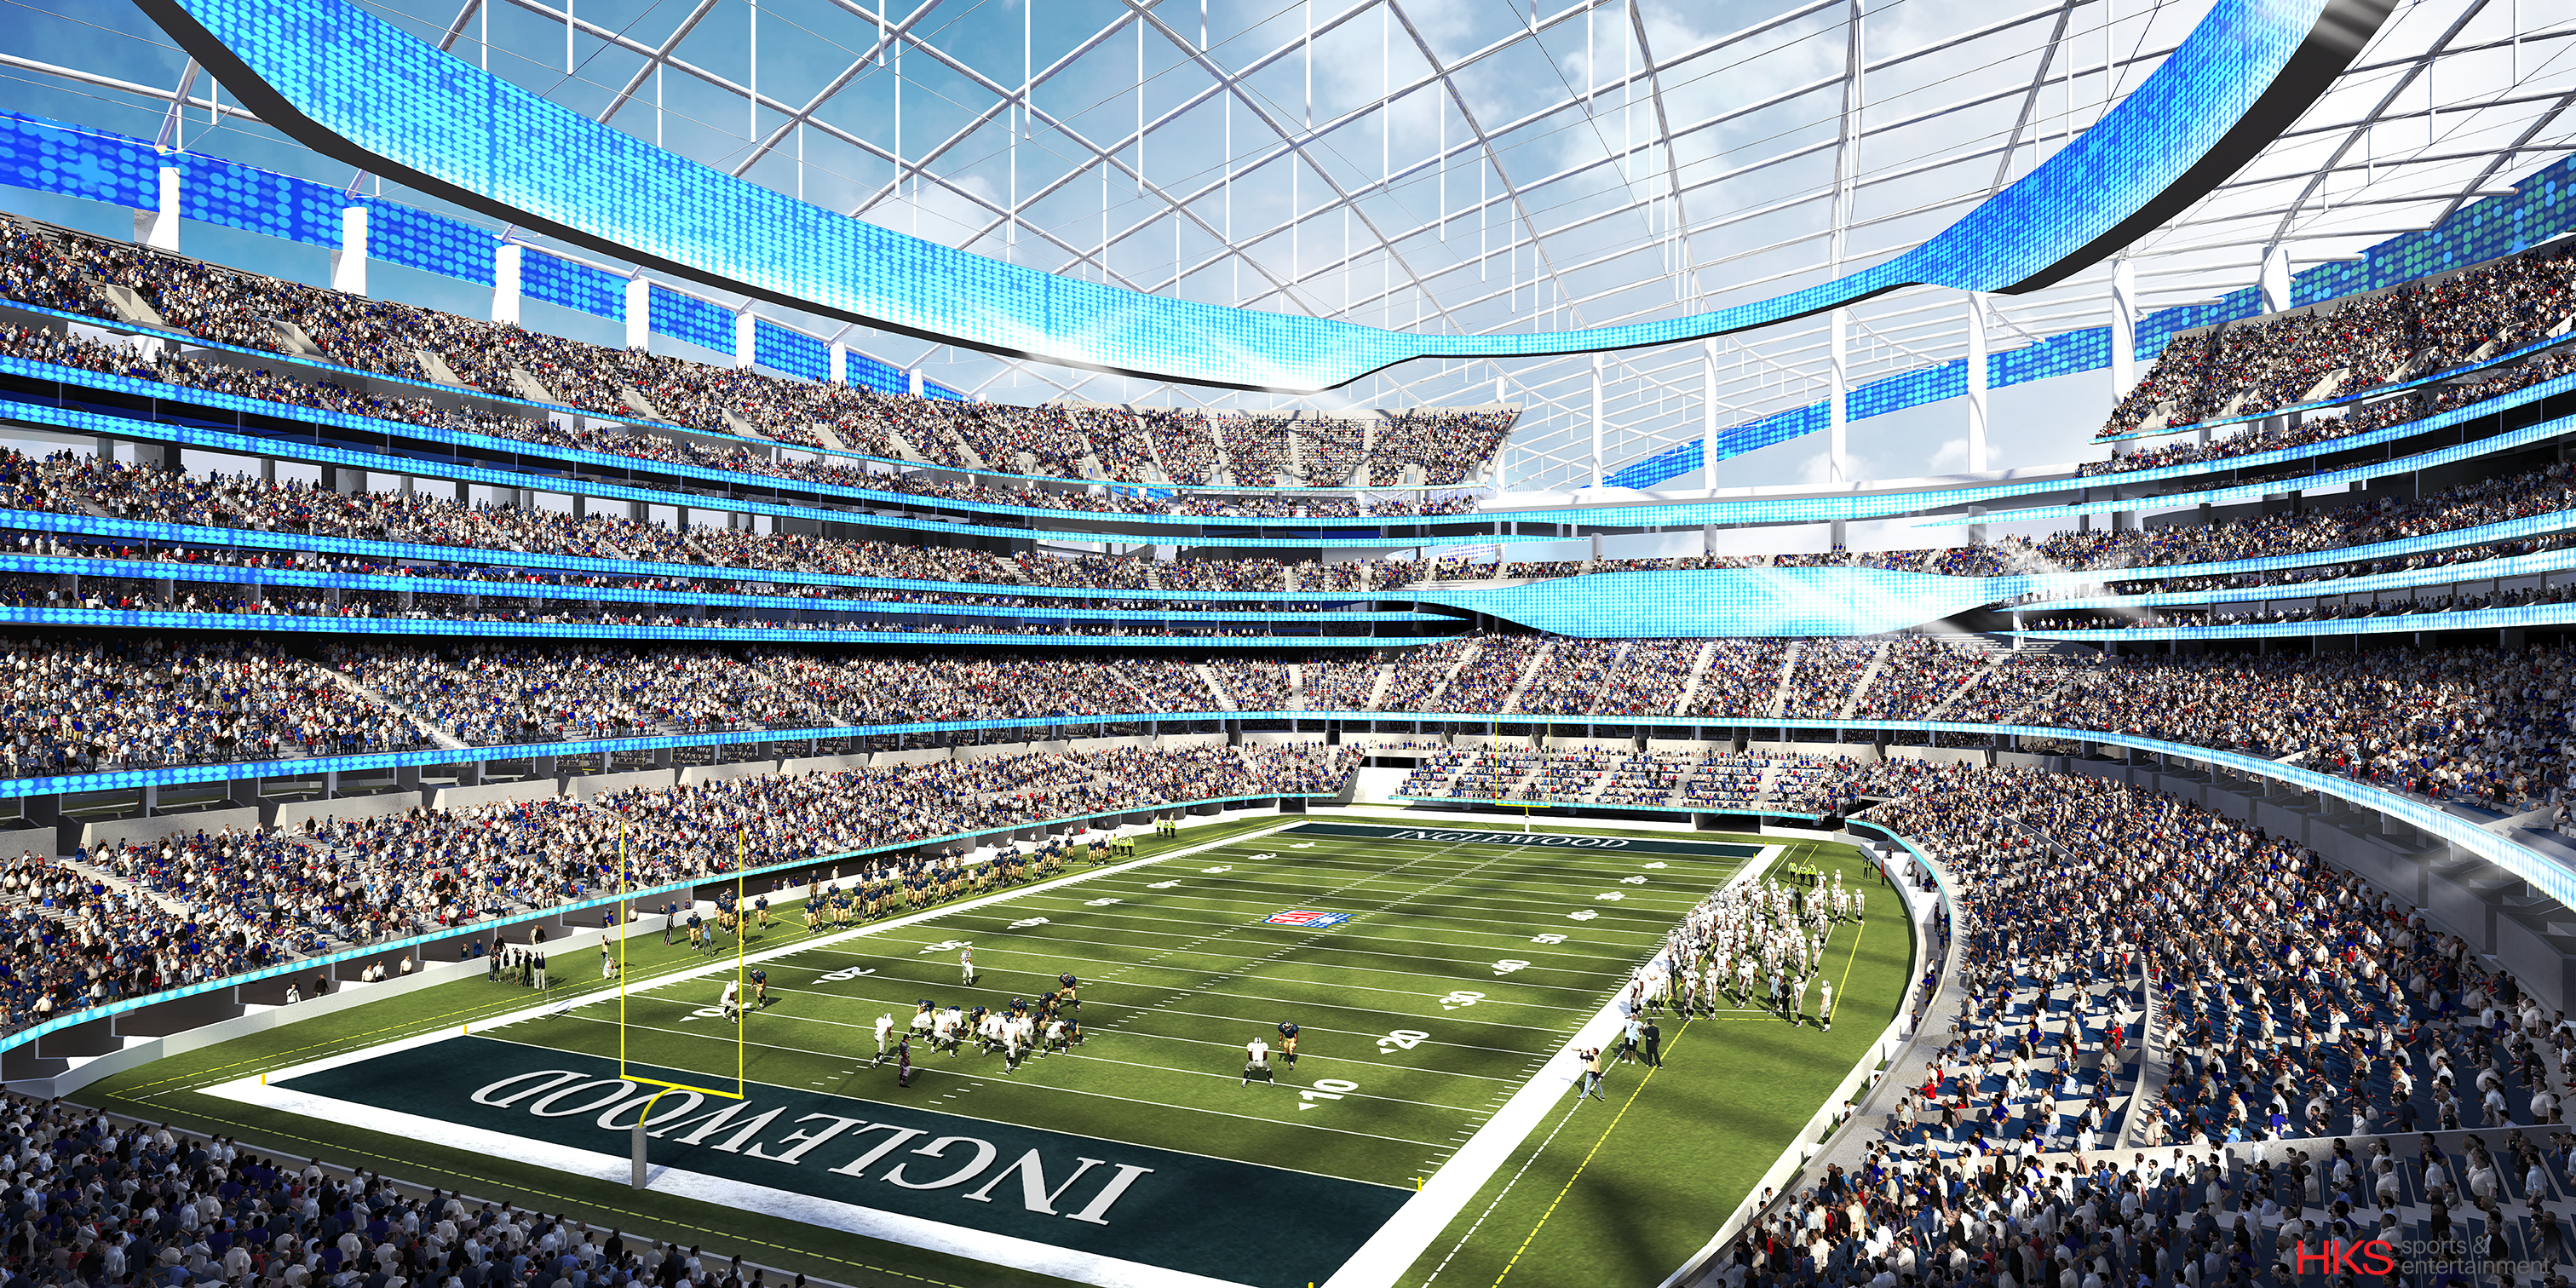 New LA Rams stadium in Inglewood to be world's most expensive - CNN ...